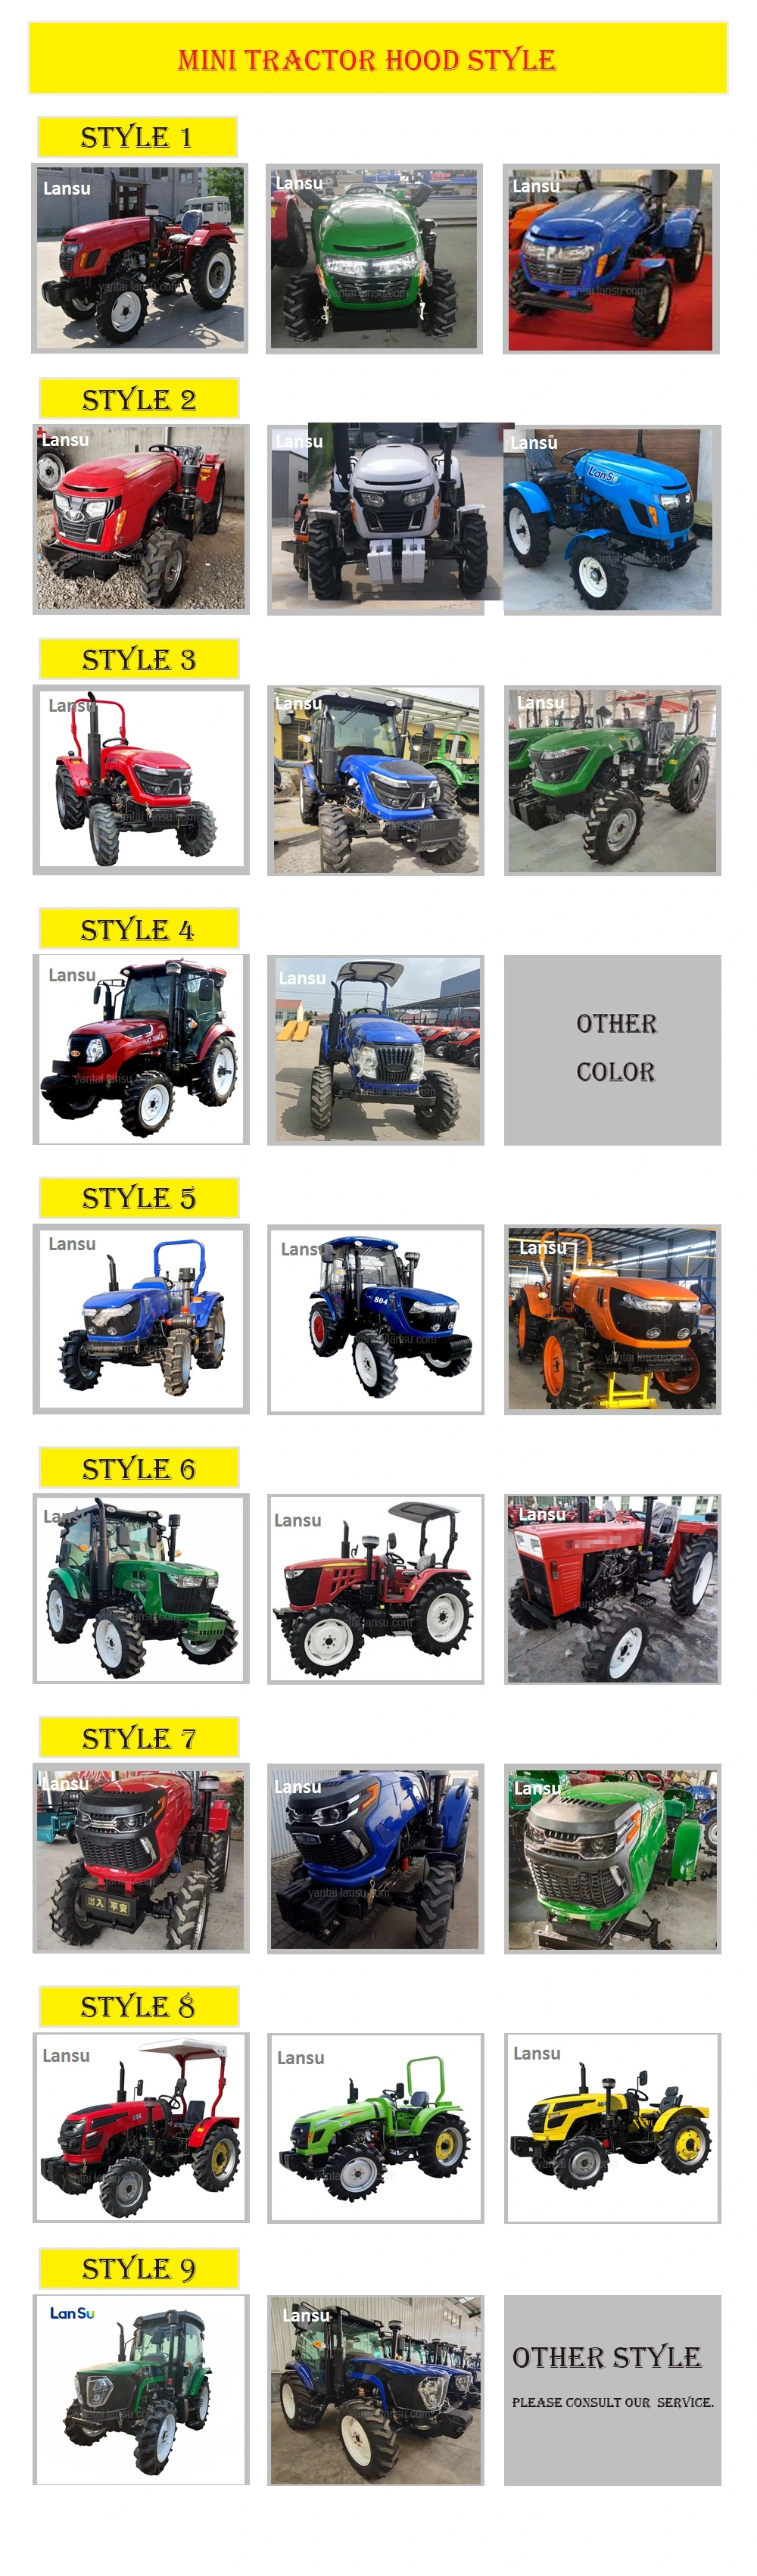 China Hot Sale Good Price 4WD Mini Small Tractor Four Wheels Farm Tractor